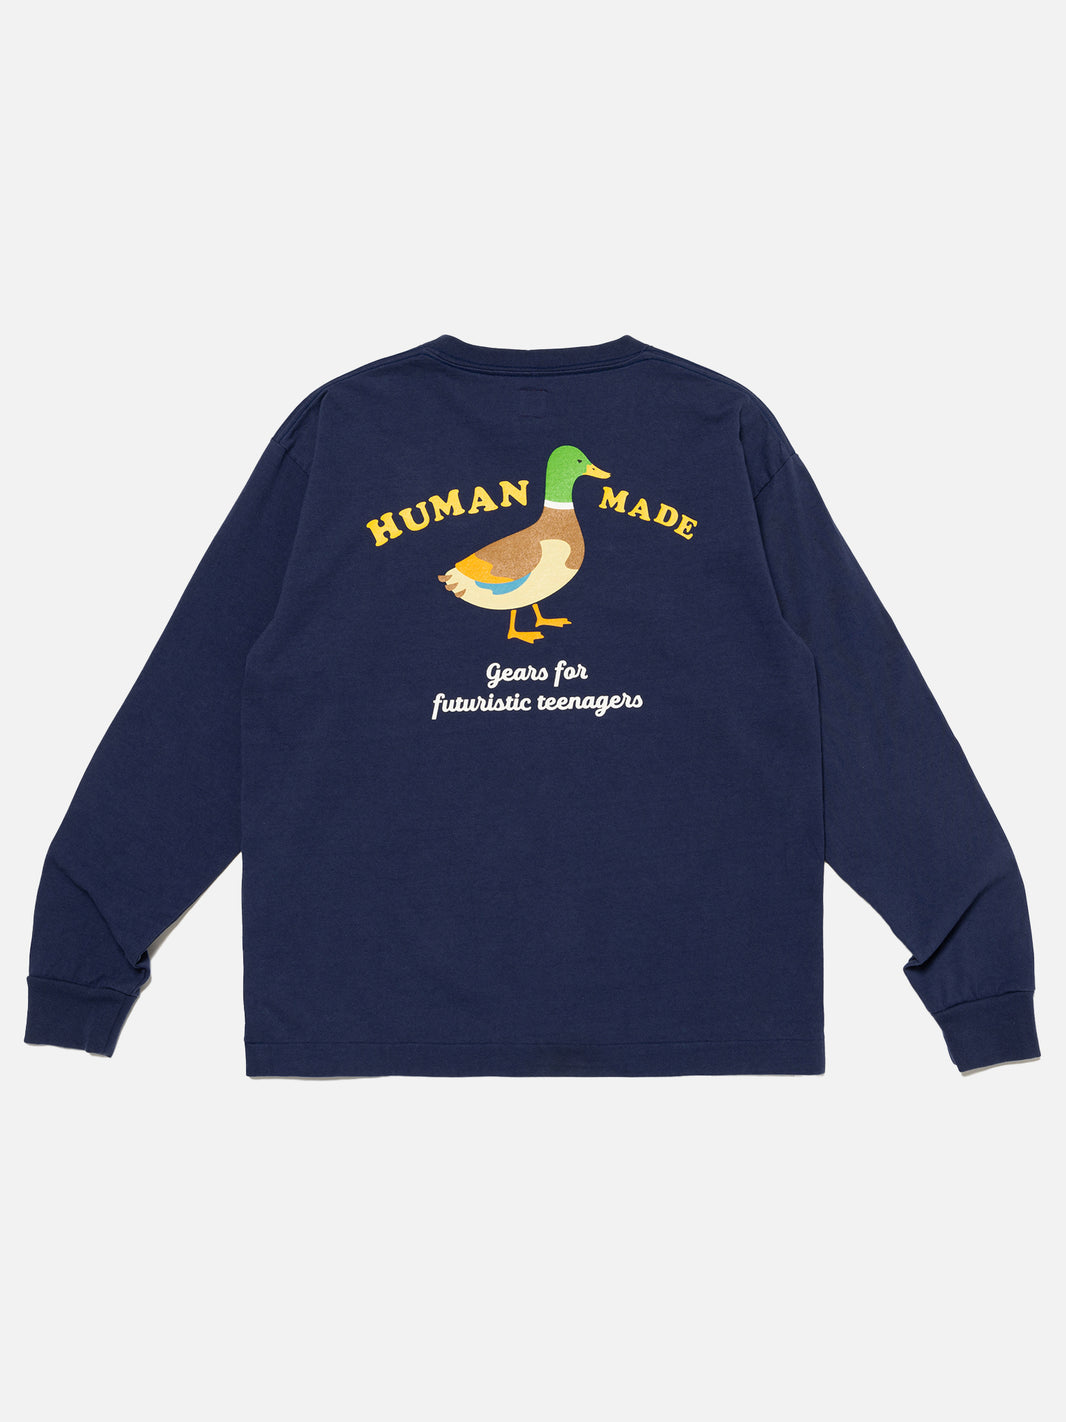 Duck gears for Futuristic Teenagers dry alls human made shirt